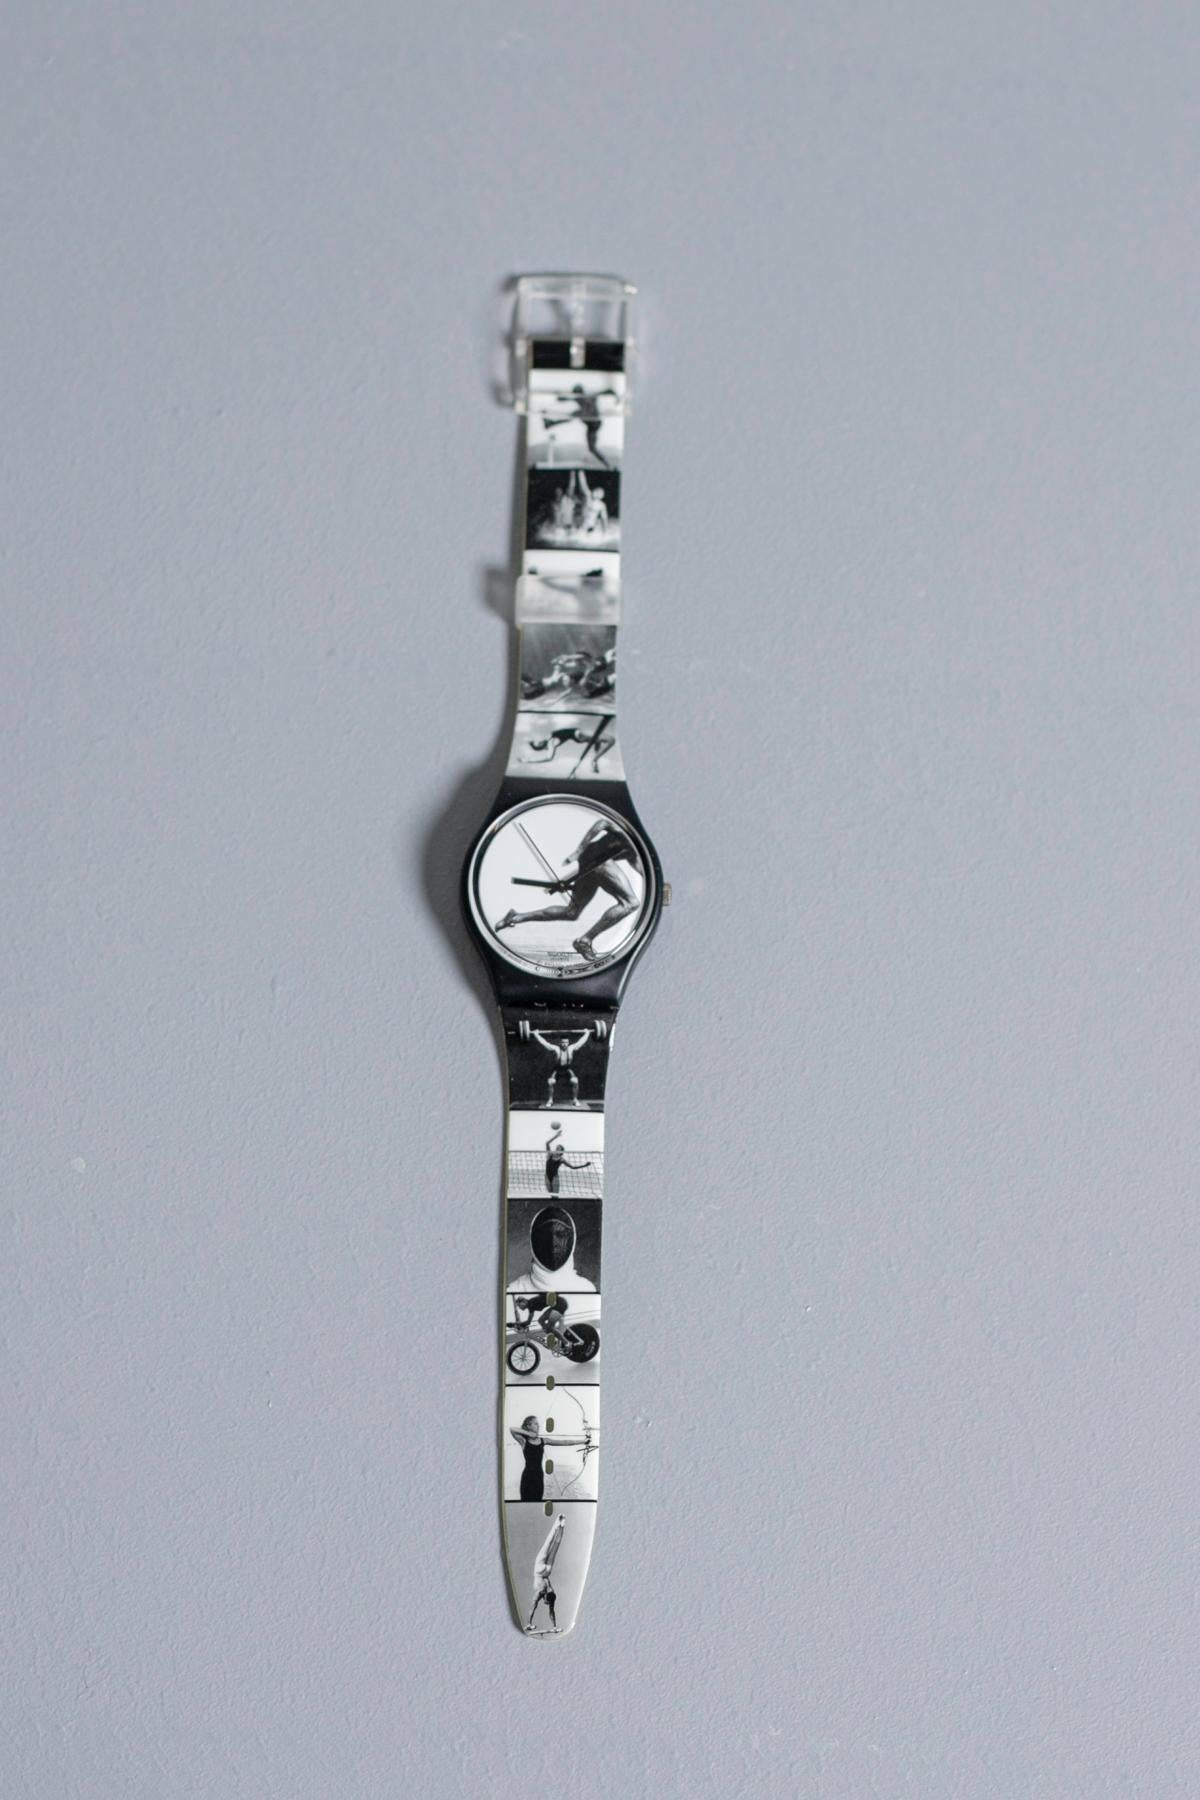 Unique vintage Swatch dedicated to the great photographer Annie Leibovitz, ten of her images are shown on the strap: timeless portraits in dynamic form, grace, beauty, art. Year 1996, original packaging, good condition.

Case material: Plastic
Strap